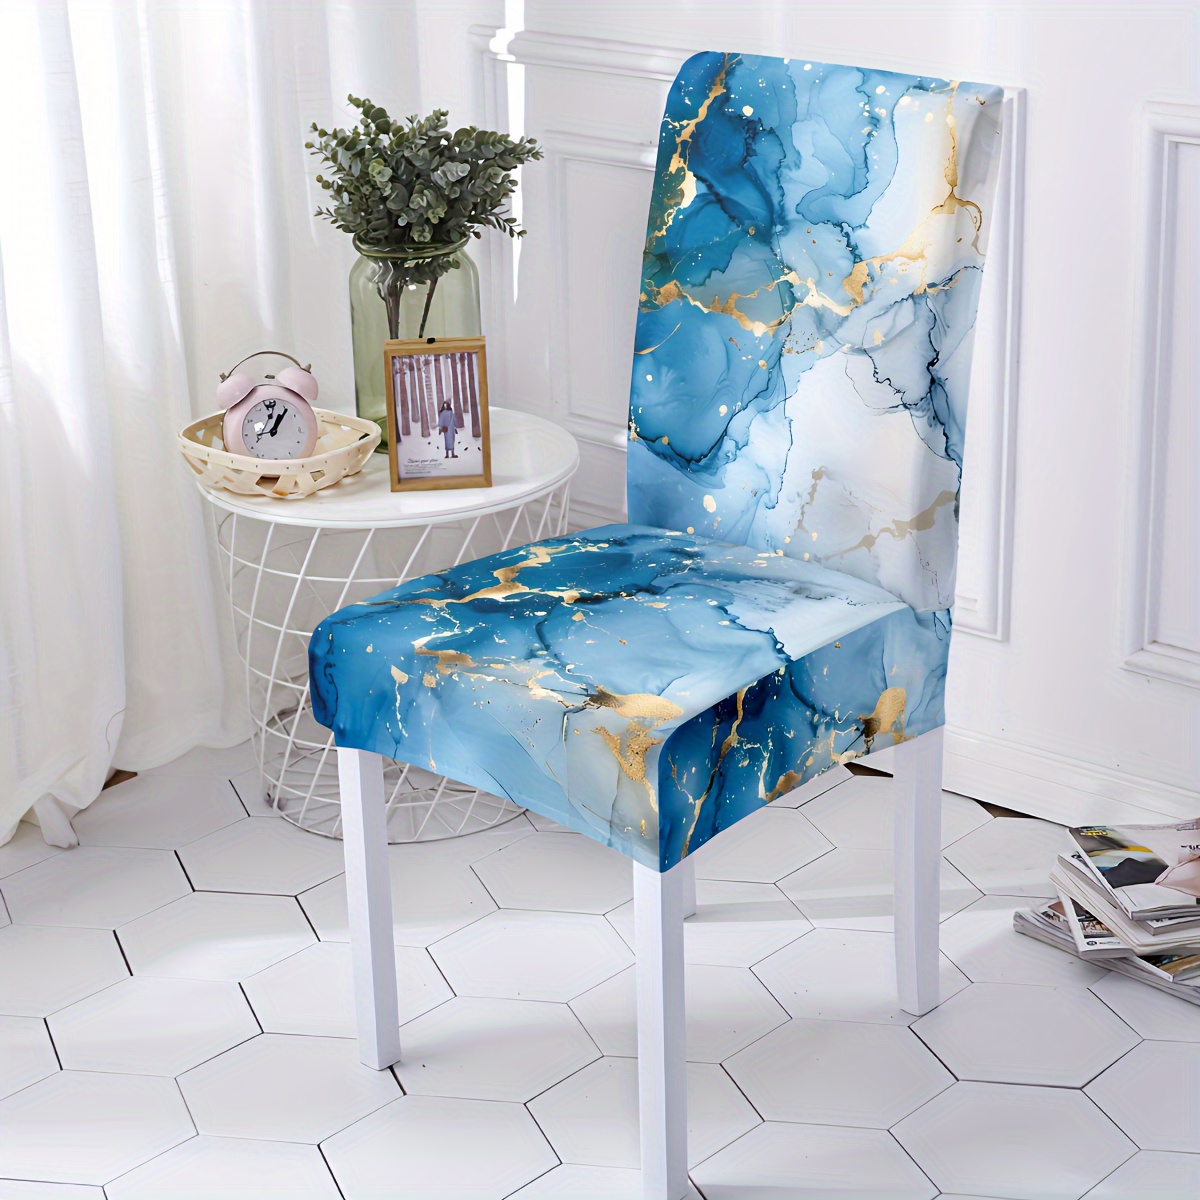 

Elegant Blue & Golden Marble Dining Chair Covers - 4/6pcs Set, Stretchable & Washable Milk Silk Fabric, Perfect For Dining, Kitchen, Banquet, Living Room Decor